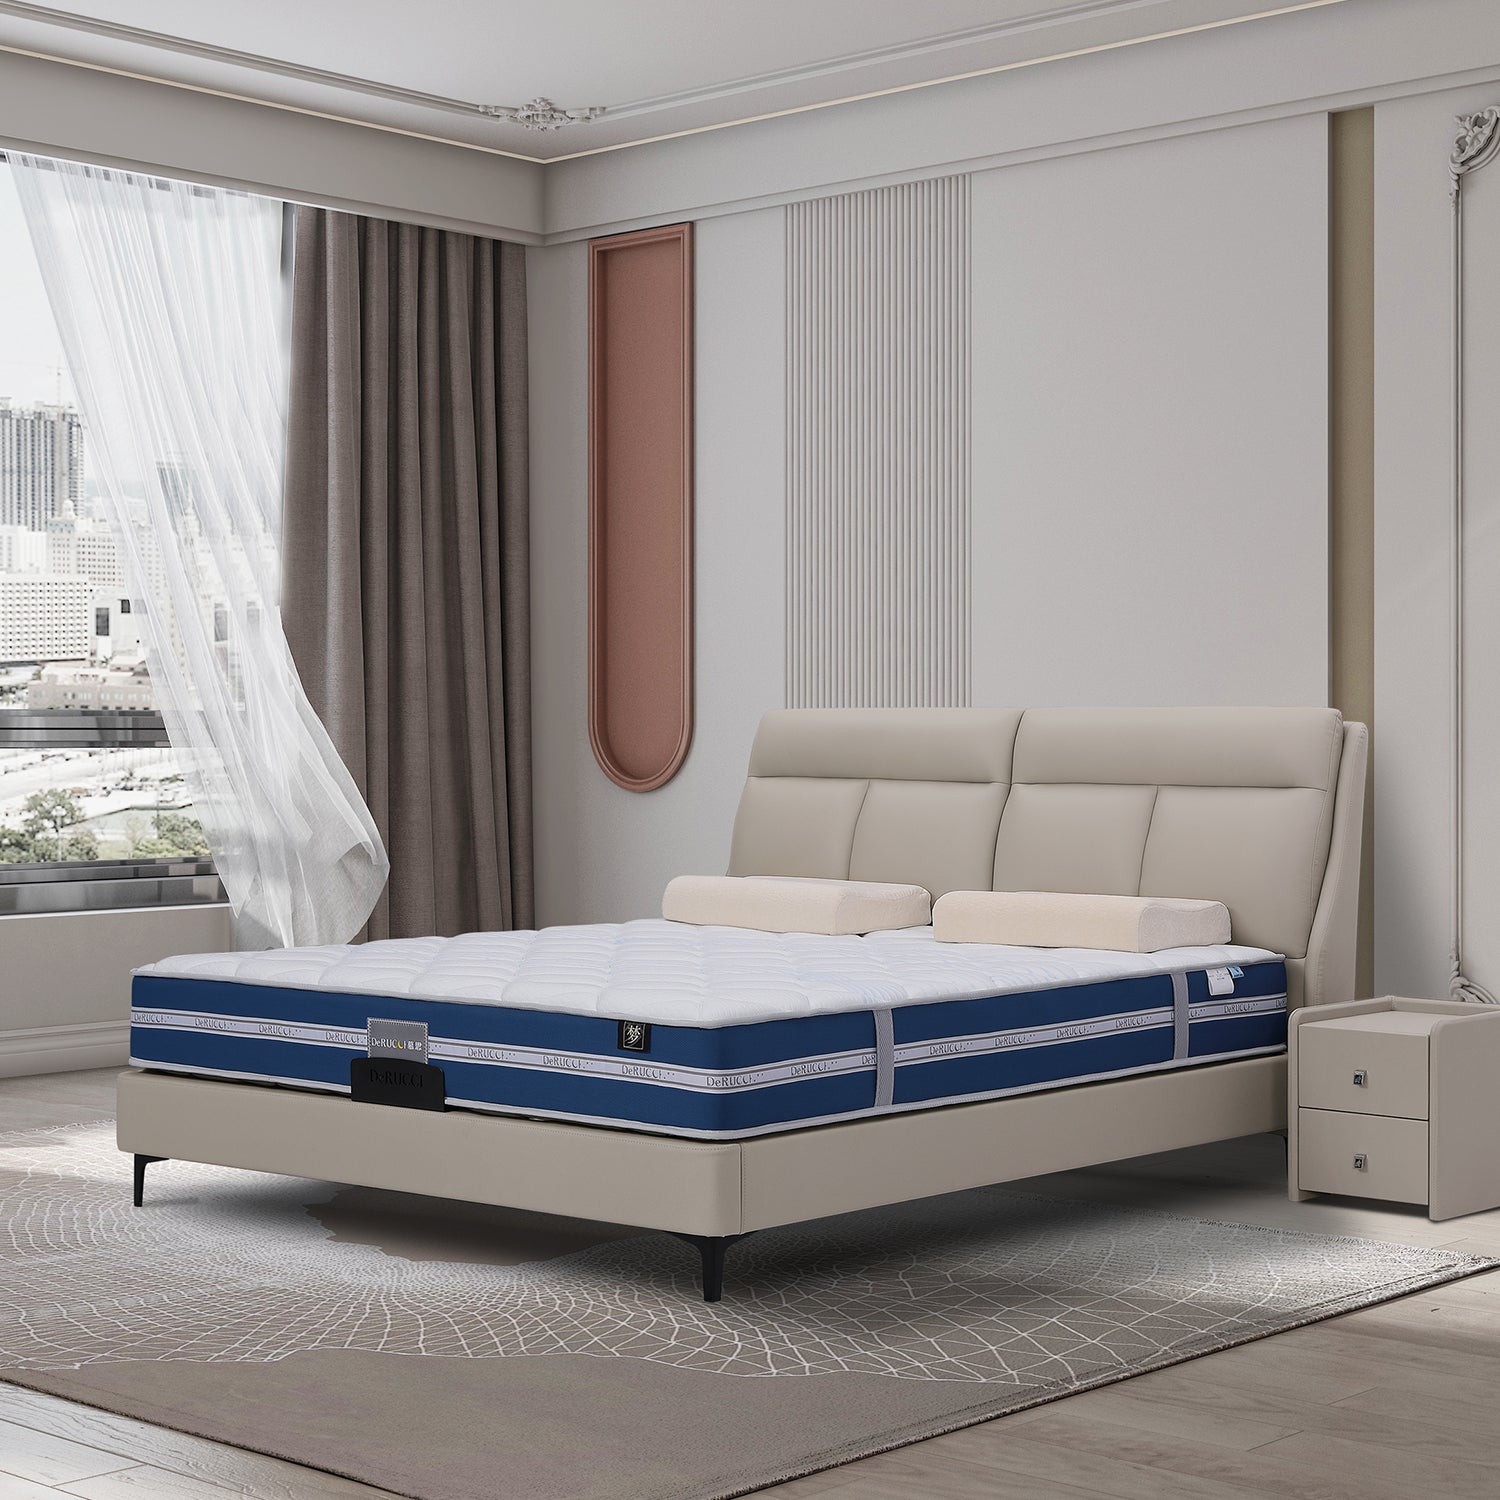 DeRUCCI Bed Frame BOC1 - 002 in beige leather with an upholstered headboard, blue and white mattress, and matching nightstands in a modern bedroom setting.